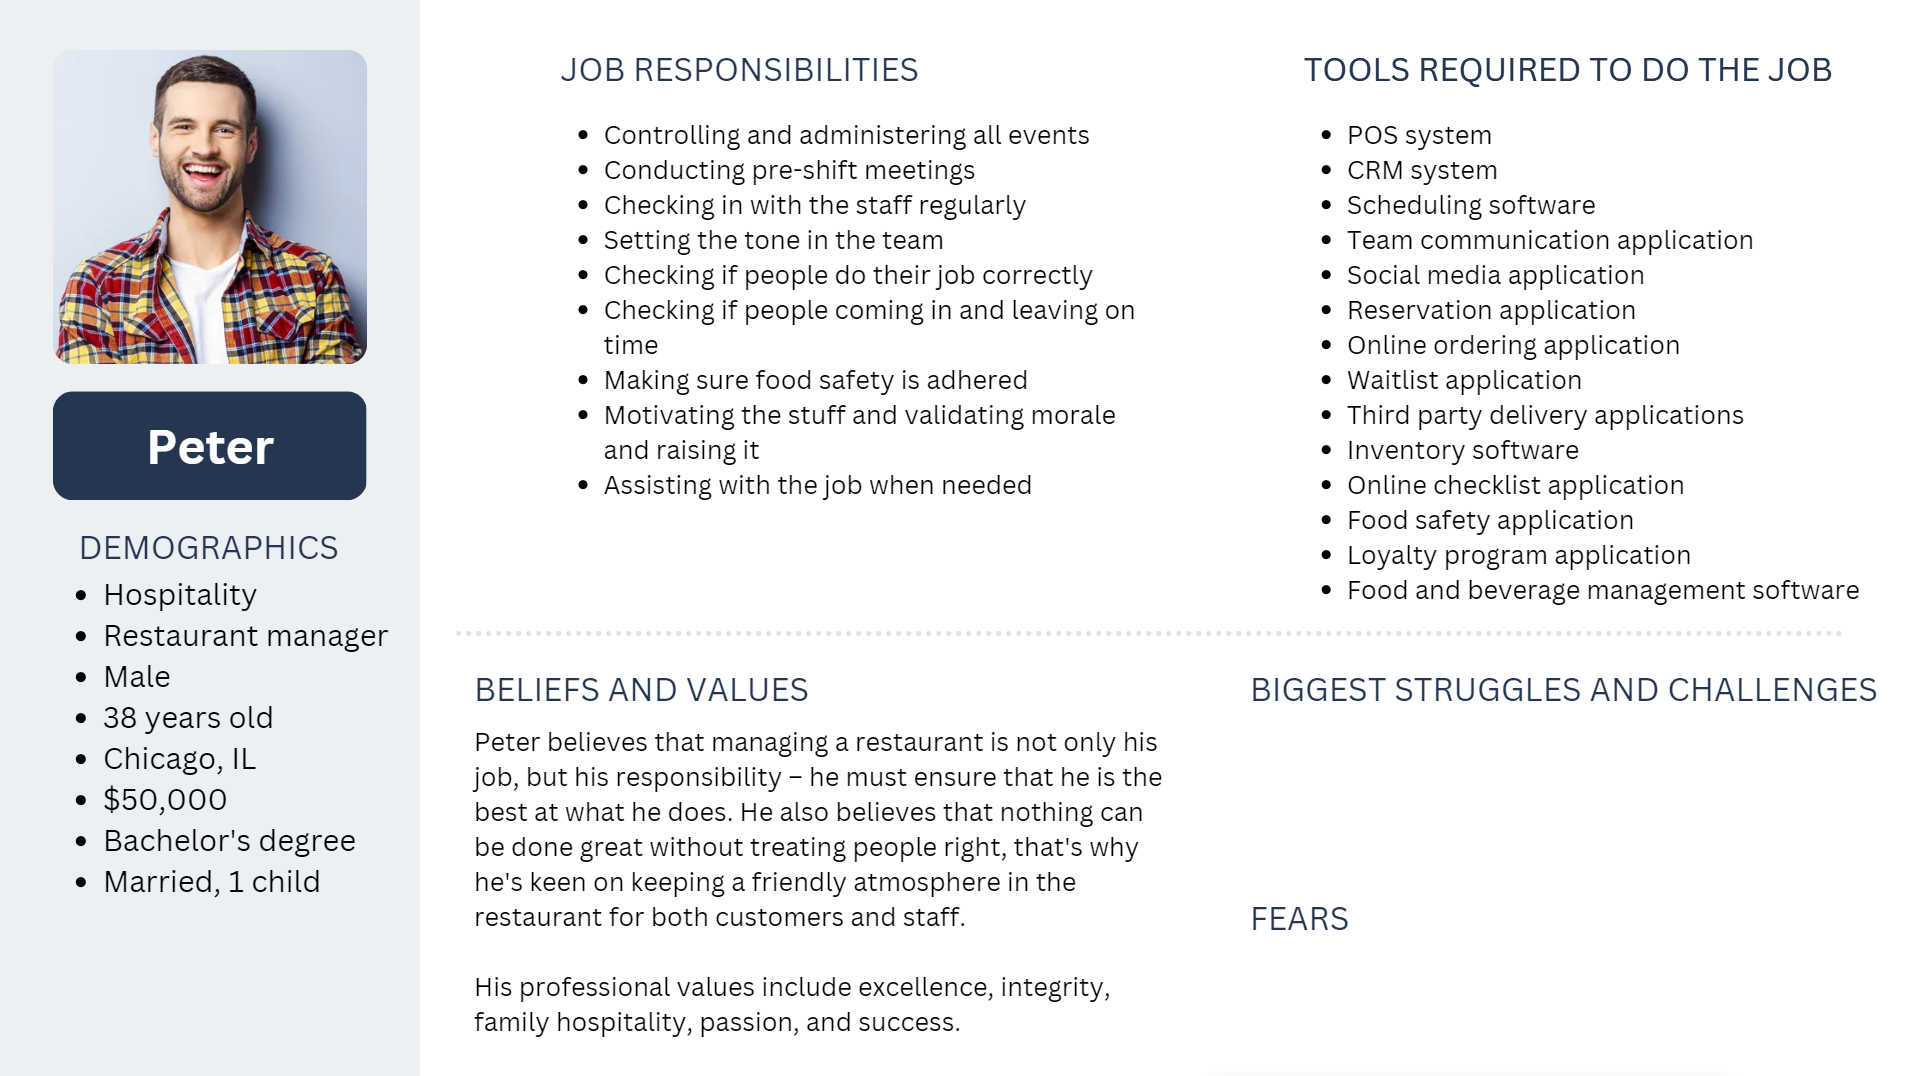 Restaurant Manager Beliefs and Values